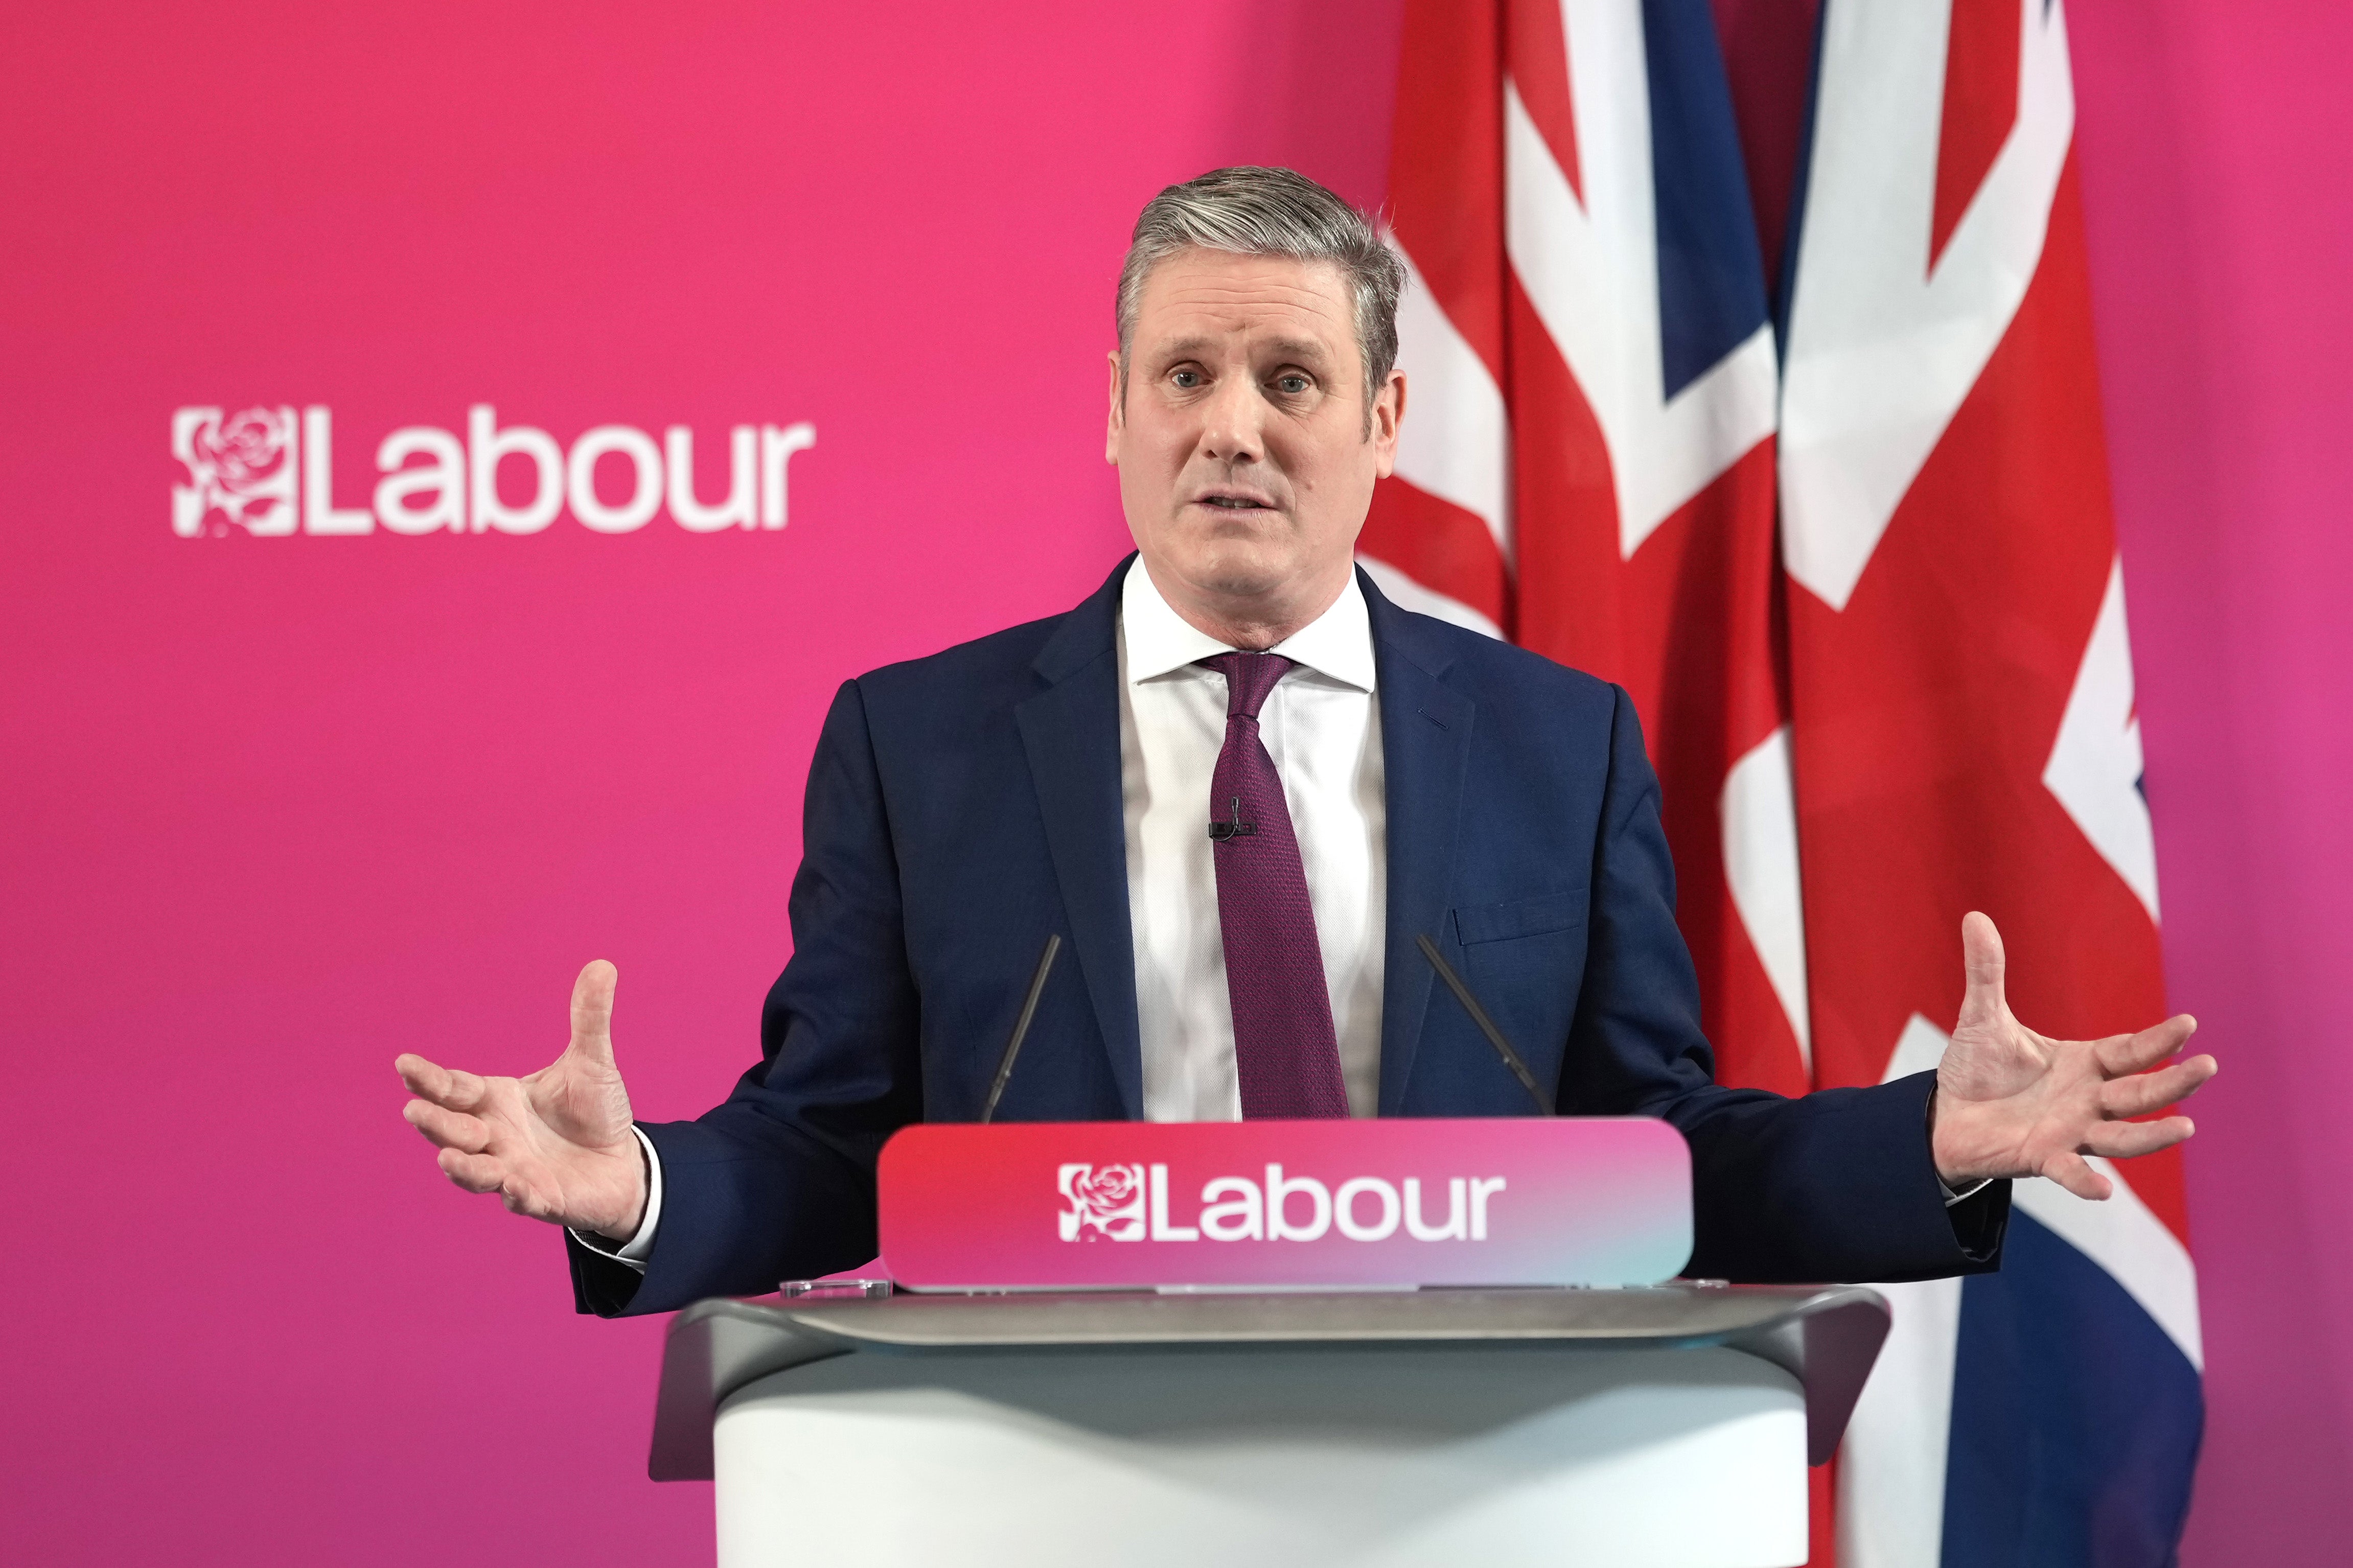 Keir Starmer regularly festoons his public appearances with flags